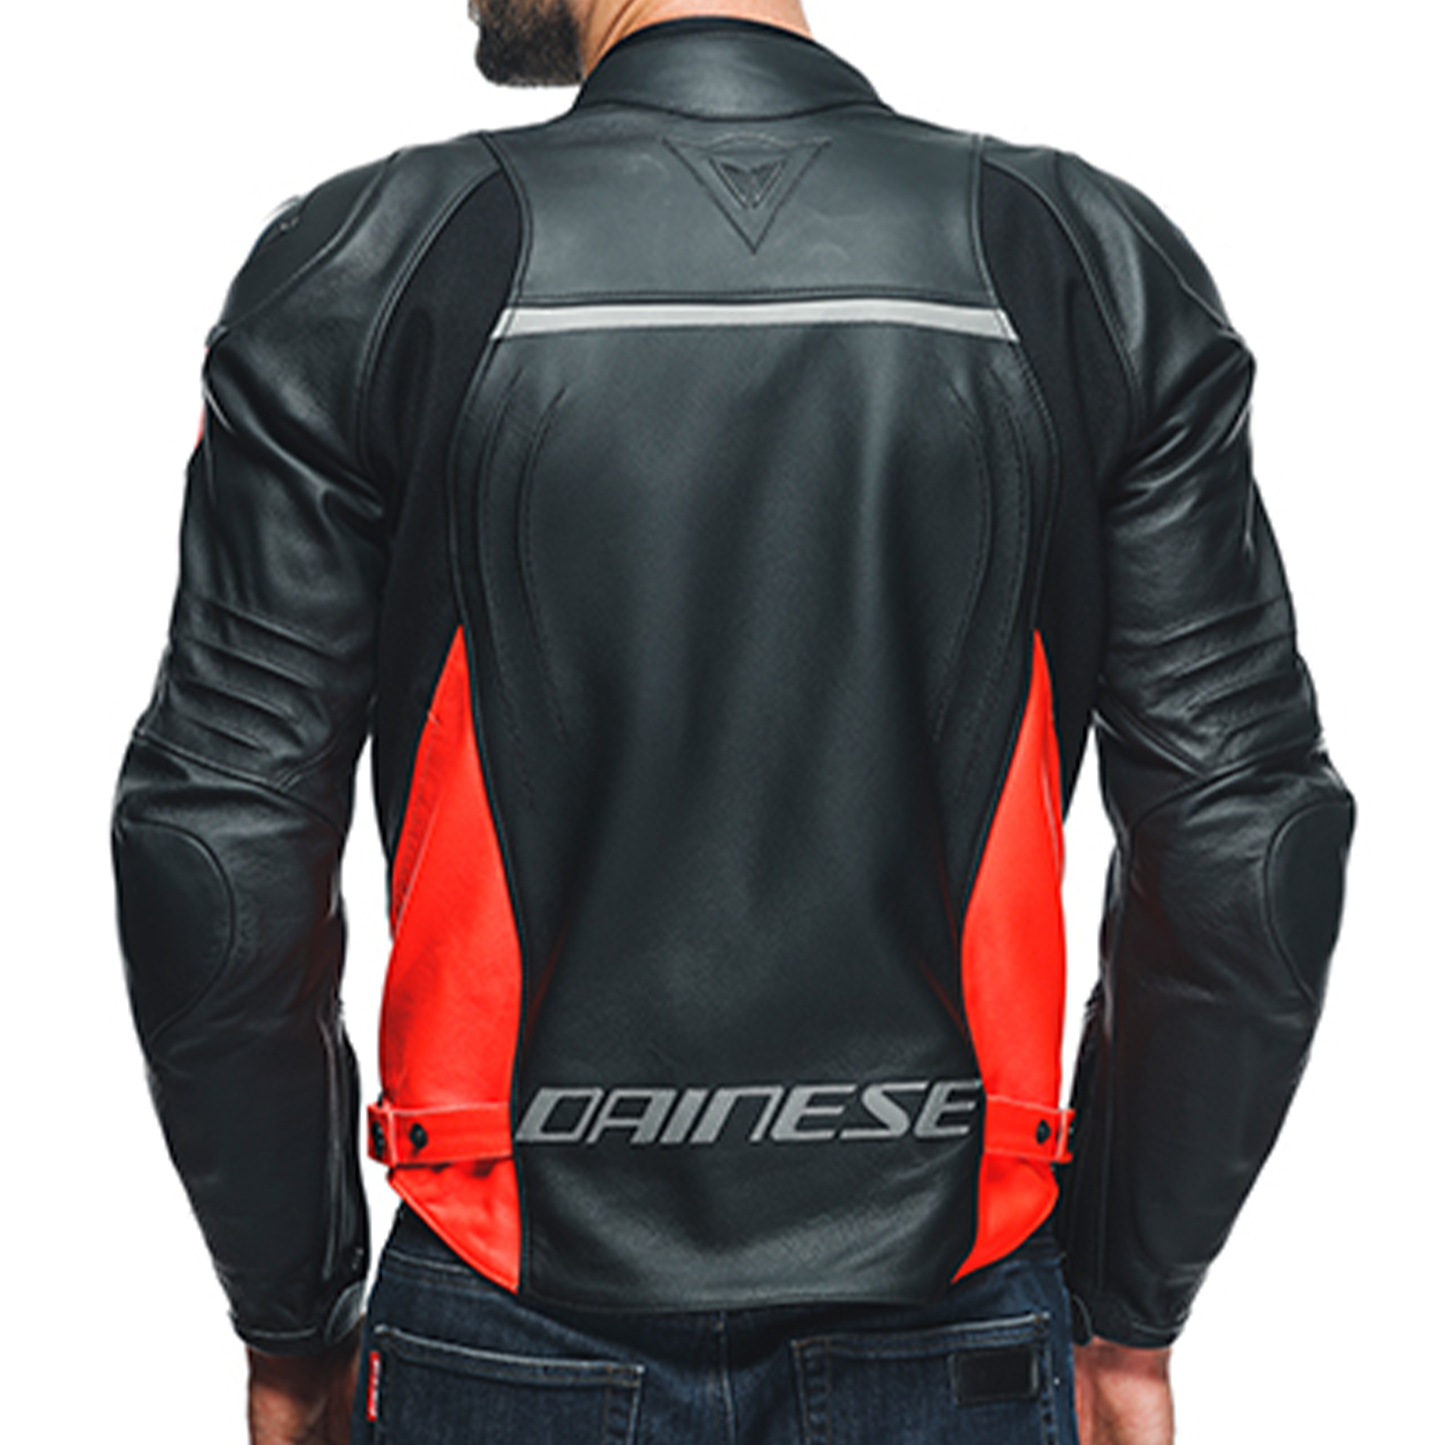 Dainese Racing 4 Leather Jacket - Black/Red Flo